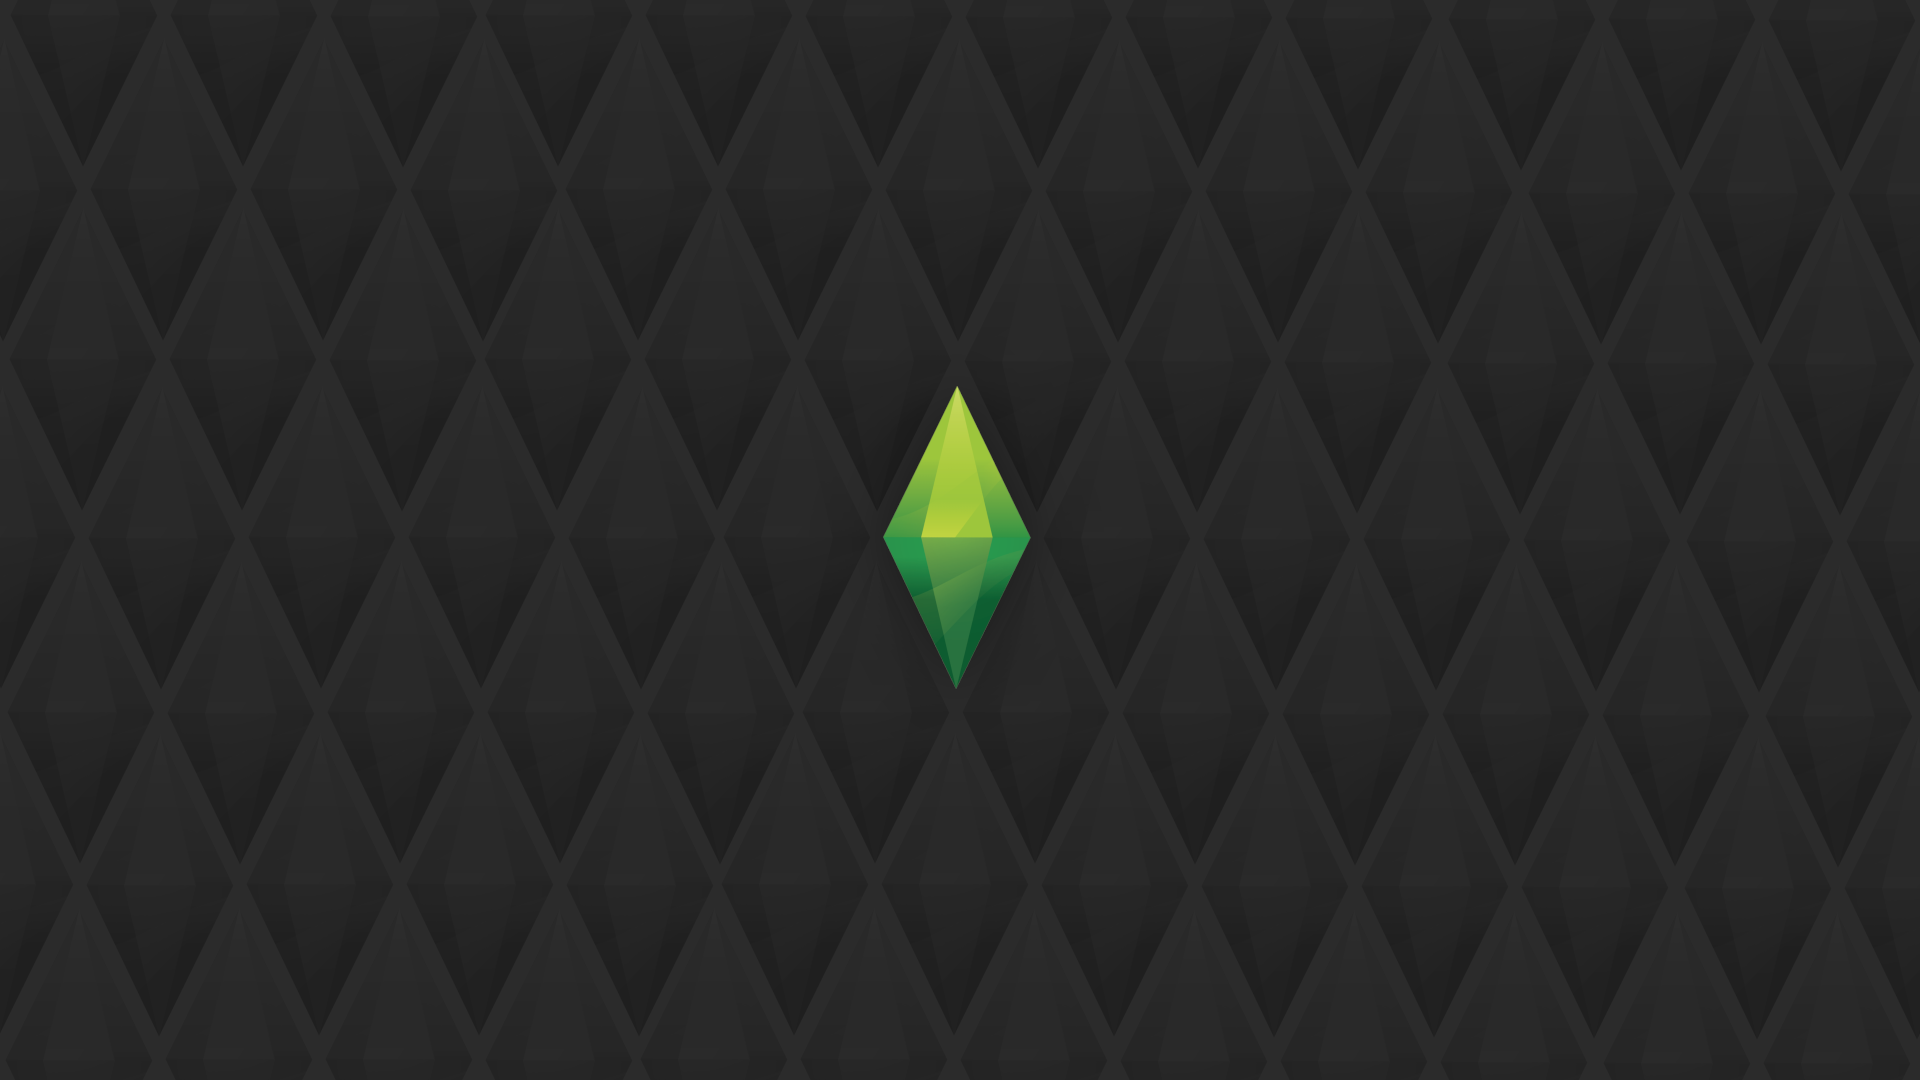 I made a simple dark themes sims wallpaper for myself and figured